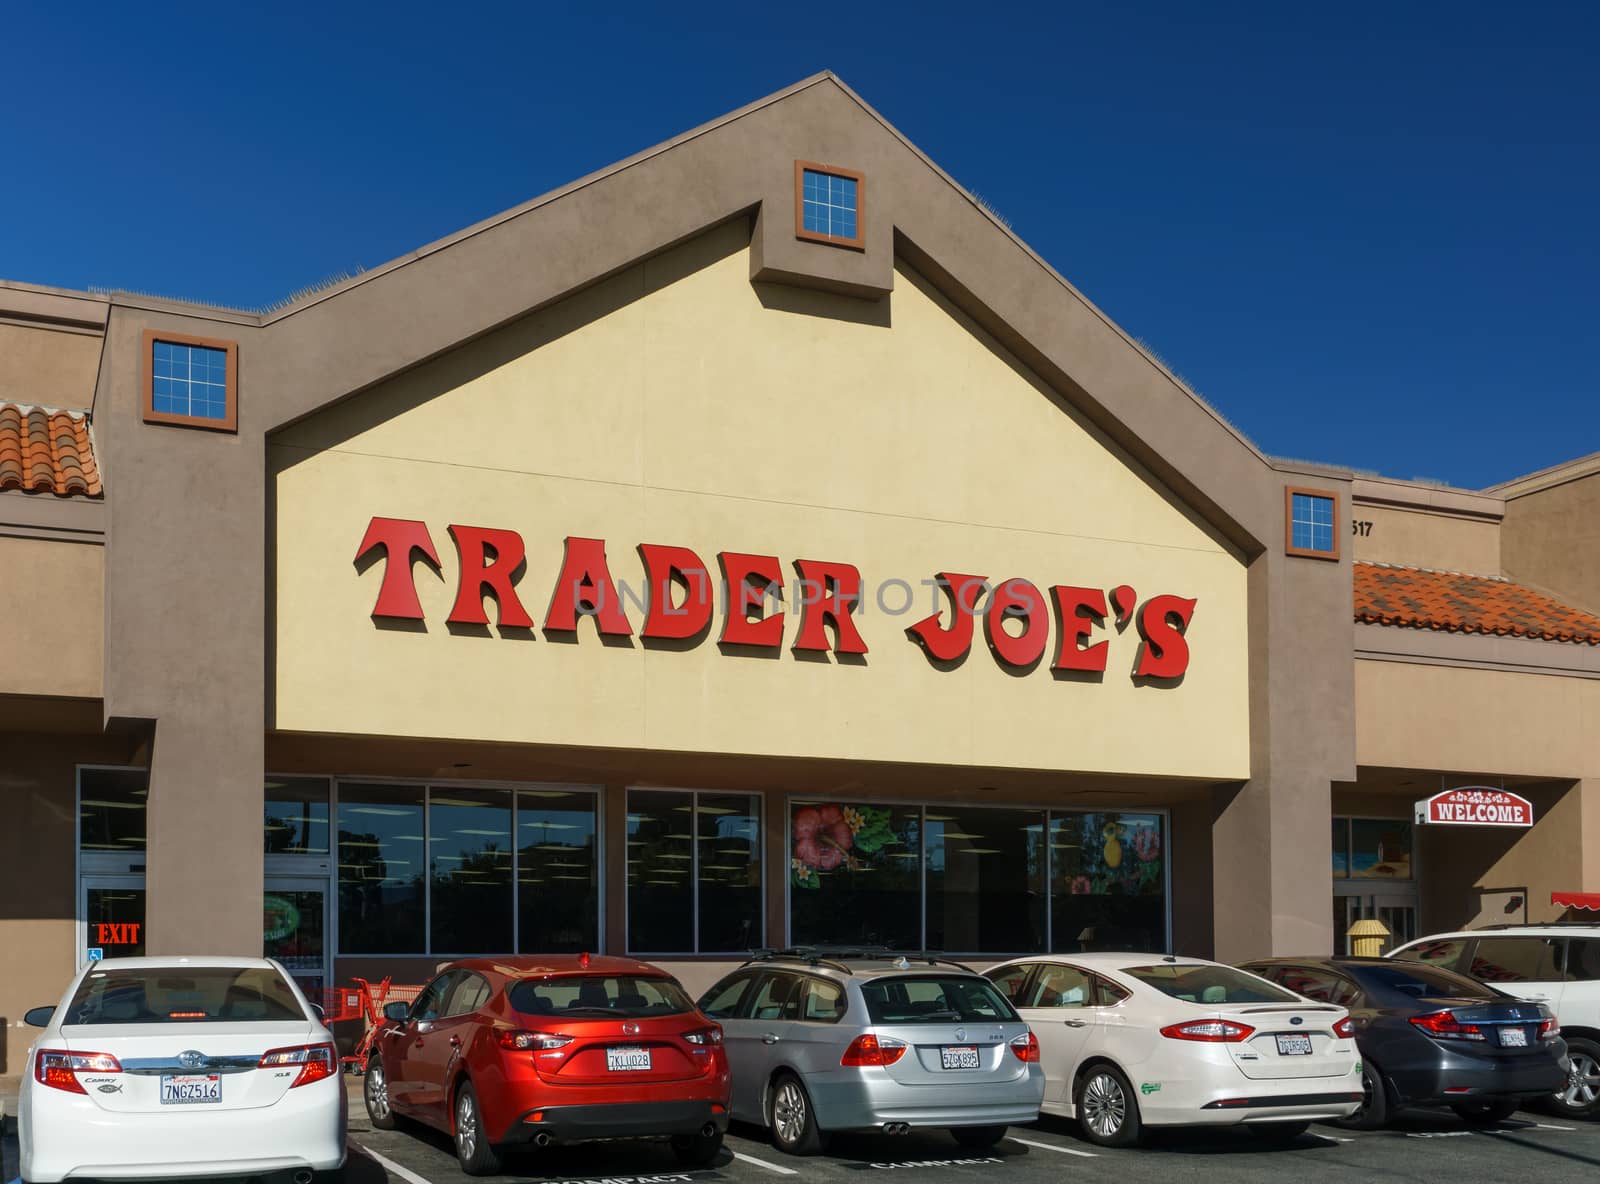 SANTA CLARITA,CA/USA - OCTOBER 31, 2015: Trader Joe's  exterior and sign. Trader Joe's is an American privately held chain of specialty grocery stores headquartered in Monrovia, California.